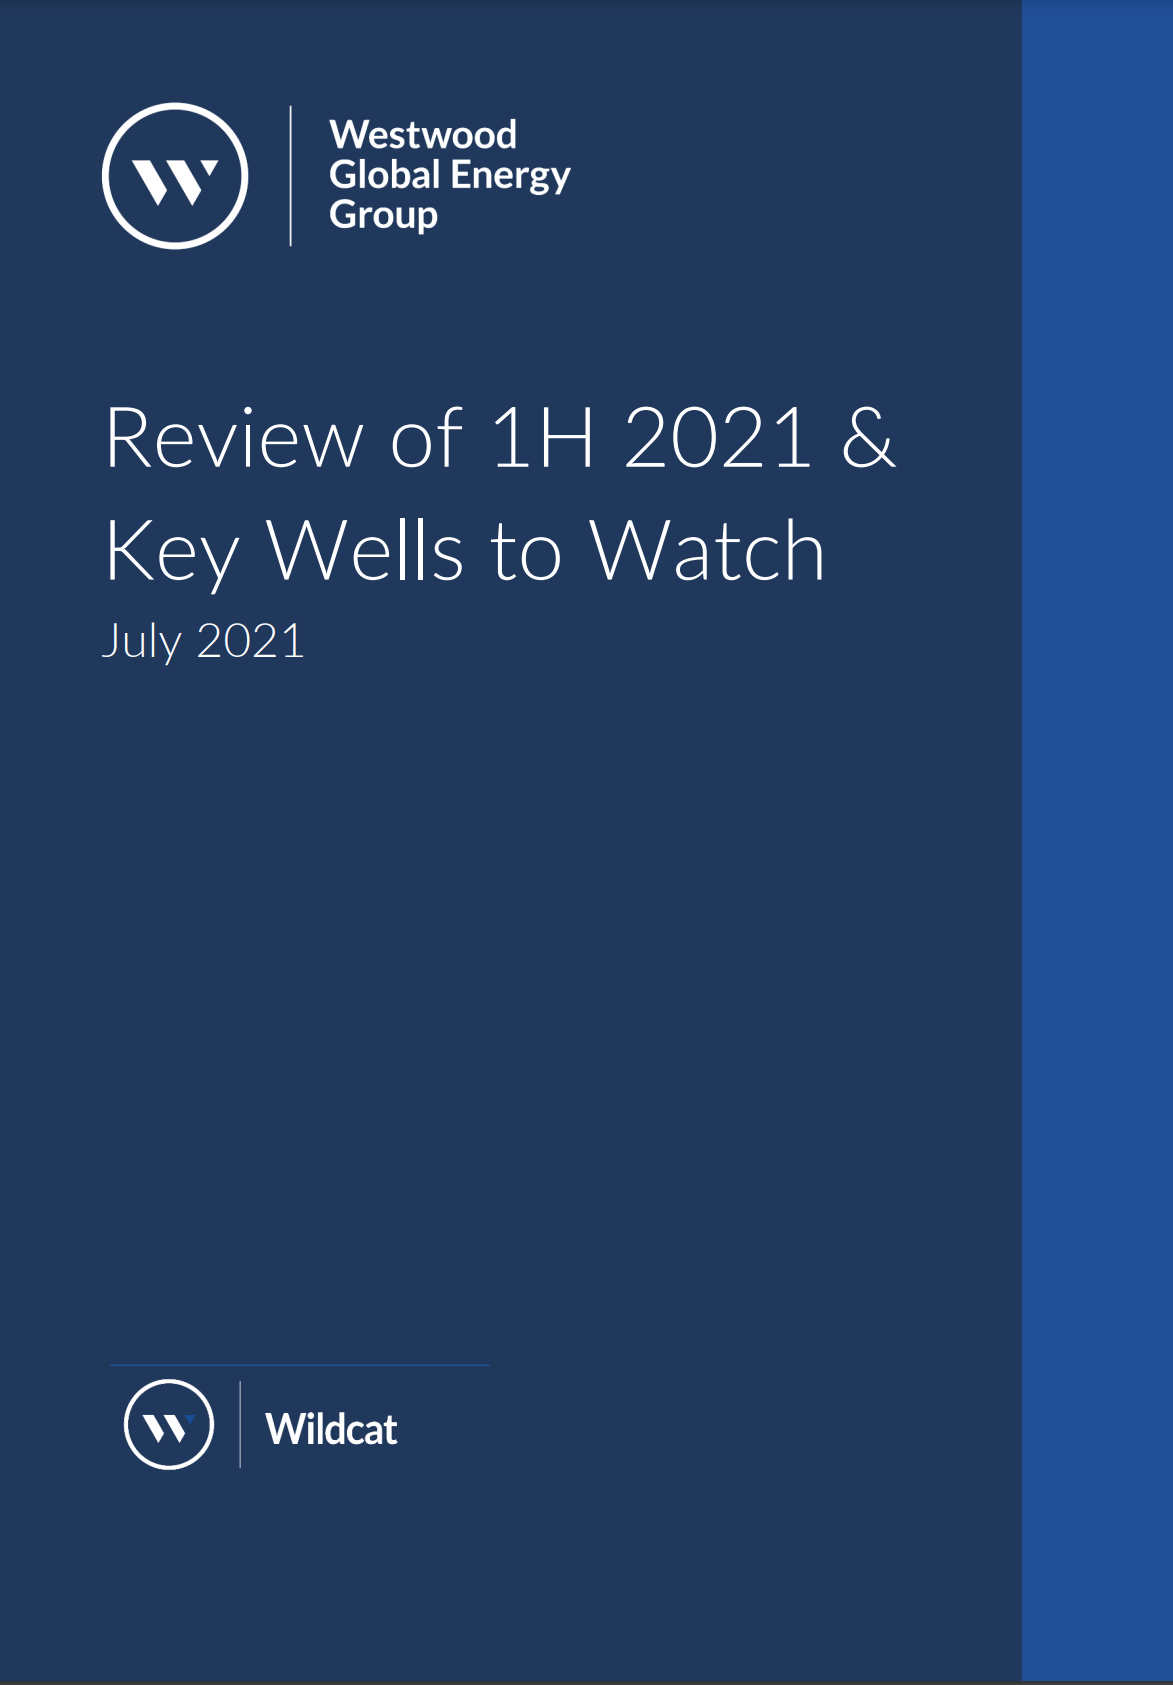 High-Impact Exploration - Review of 1H 2021 & Key Wells to Watch